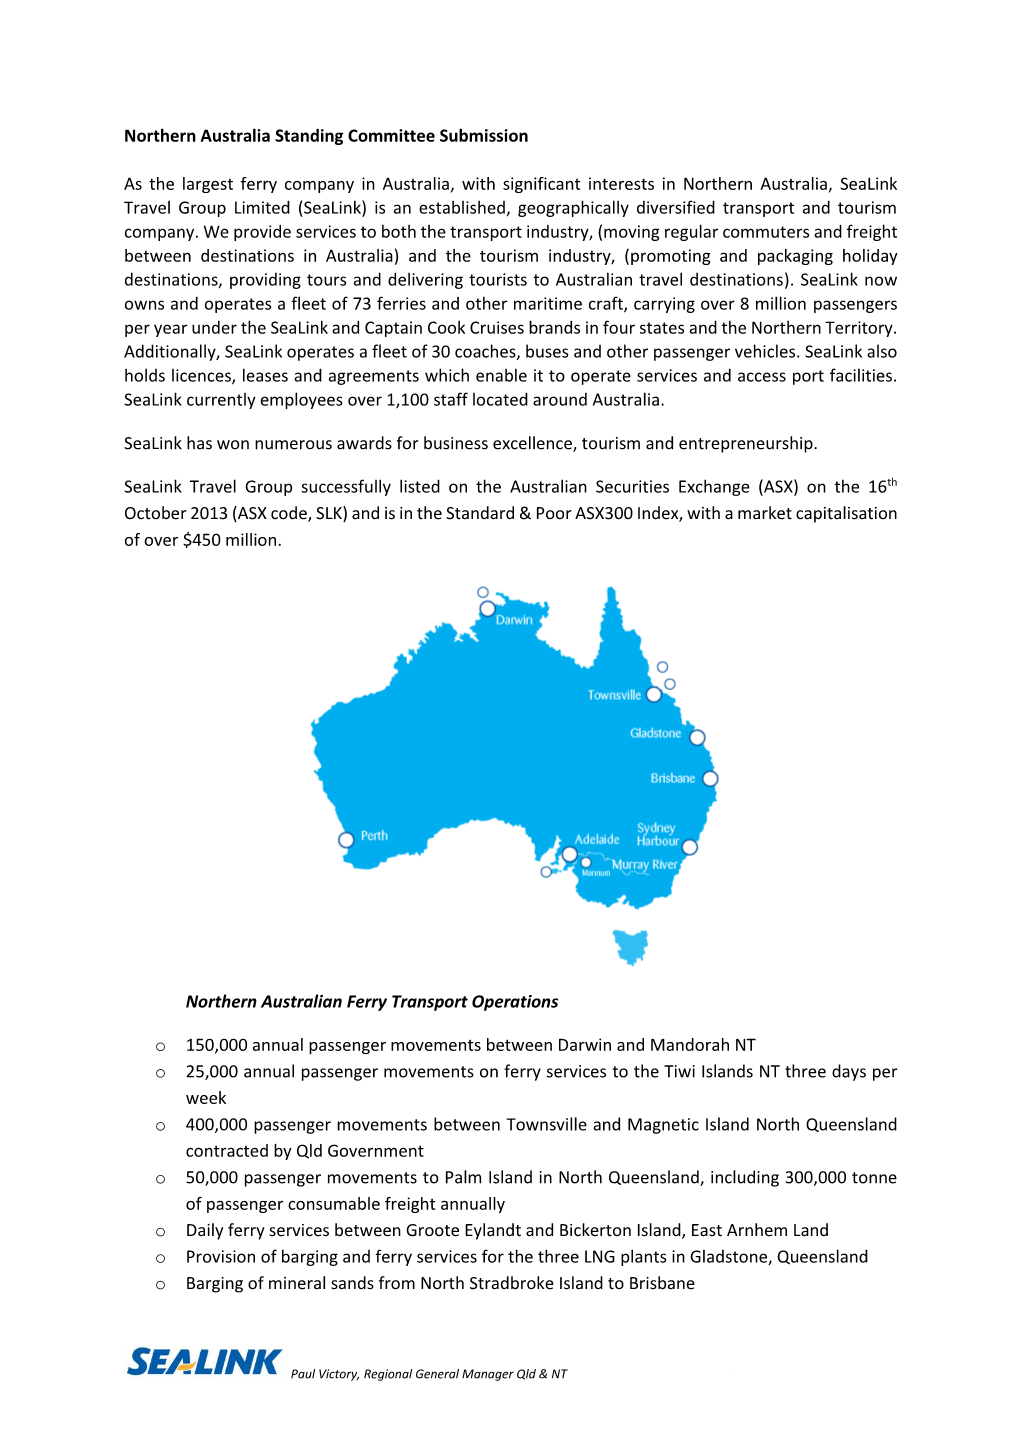 Northern Australia Standing Committee Submission As The